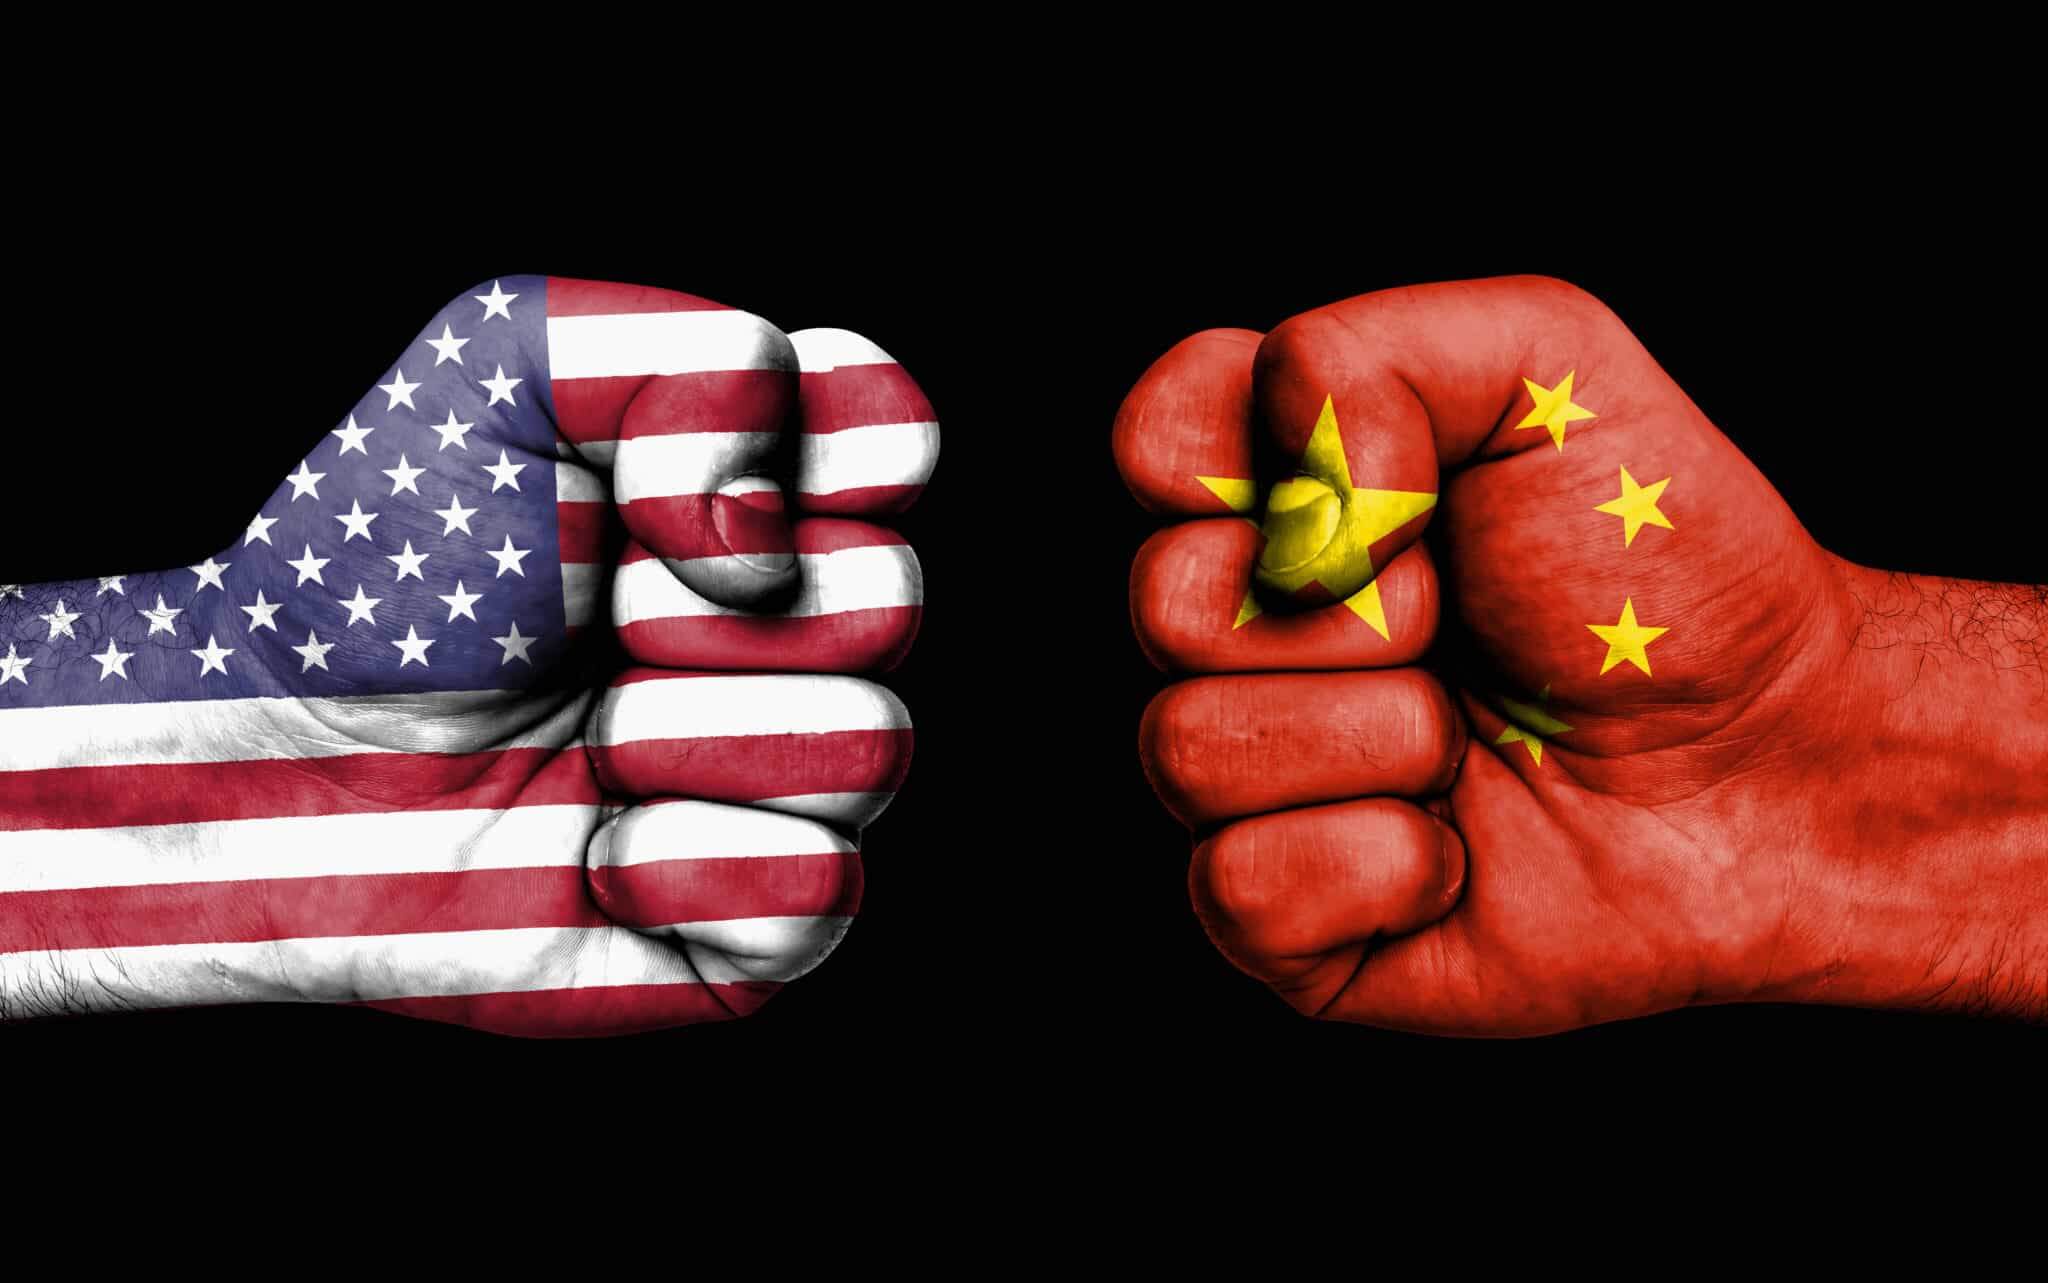 FinanceBrokerage – Economic News: Things could get uglier in the new cold war as the two superpowers drag other countries into their conflict, analysts warn.